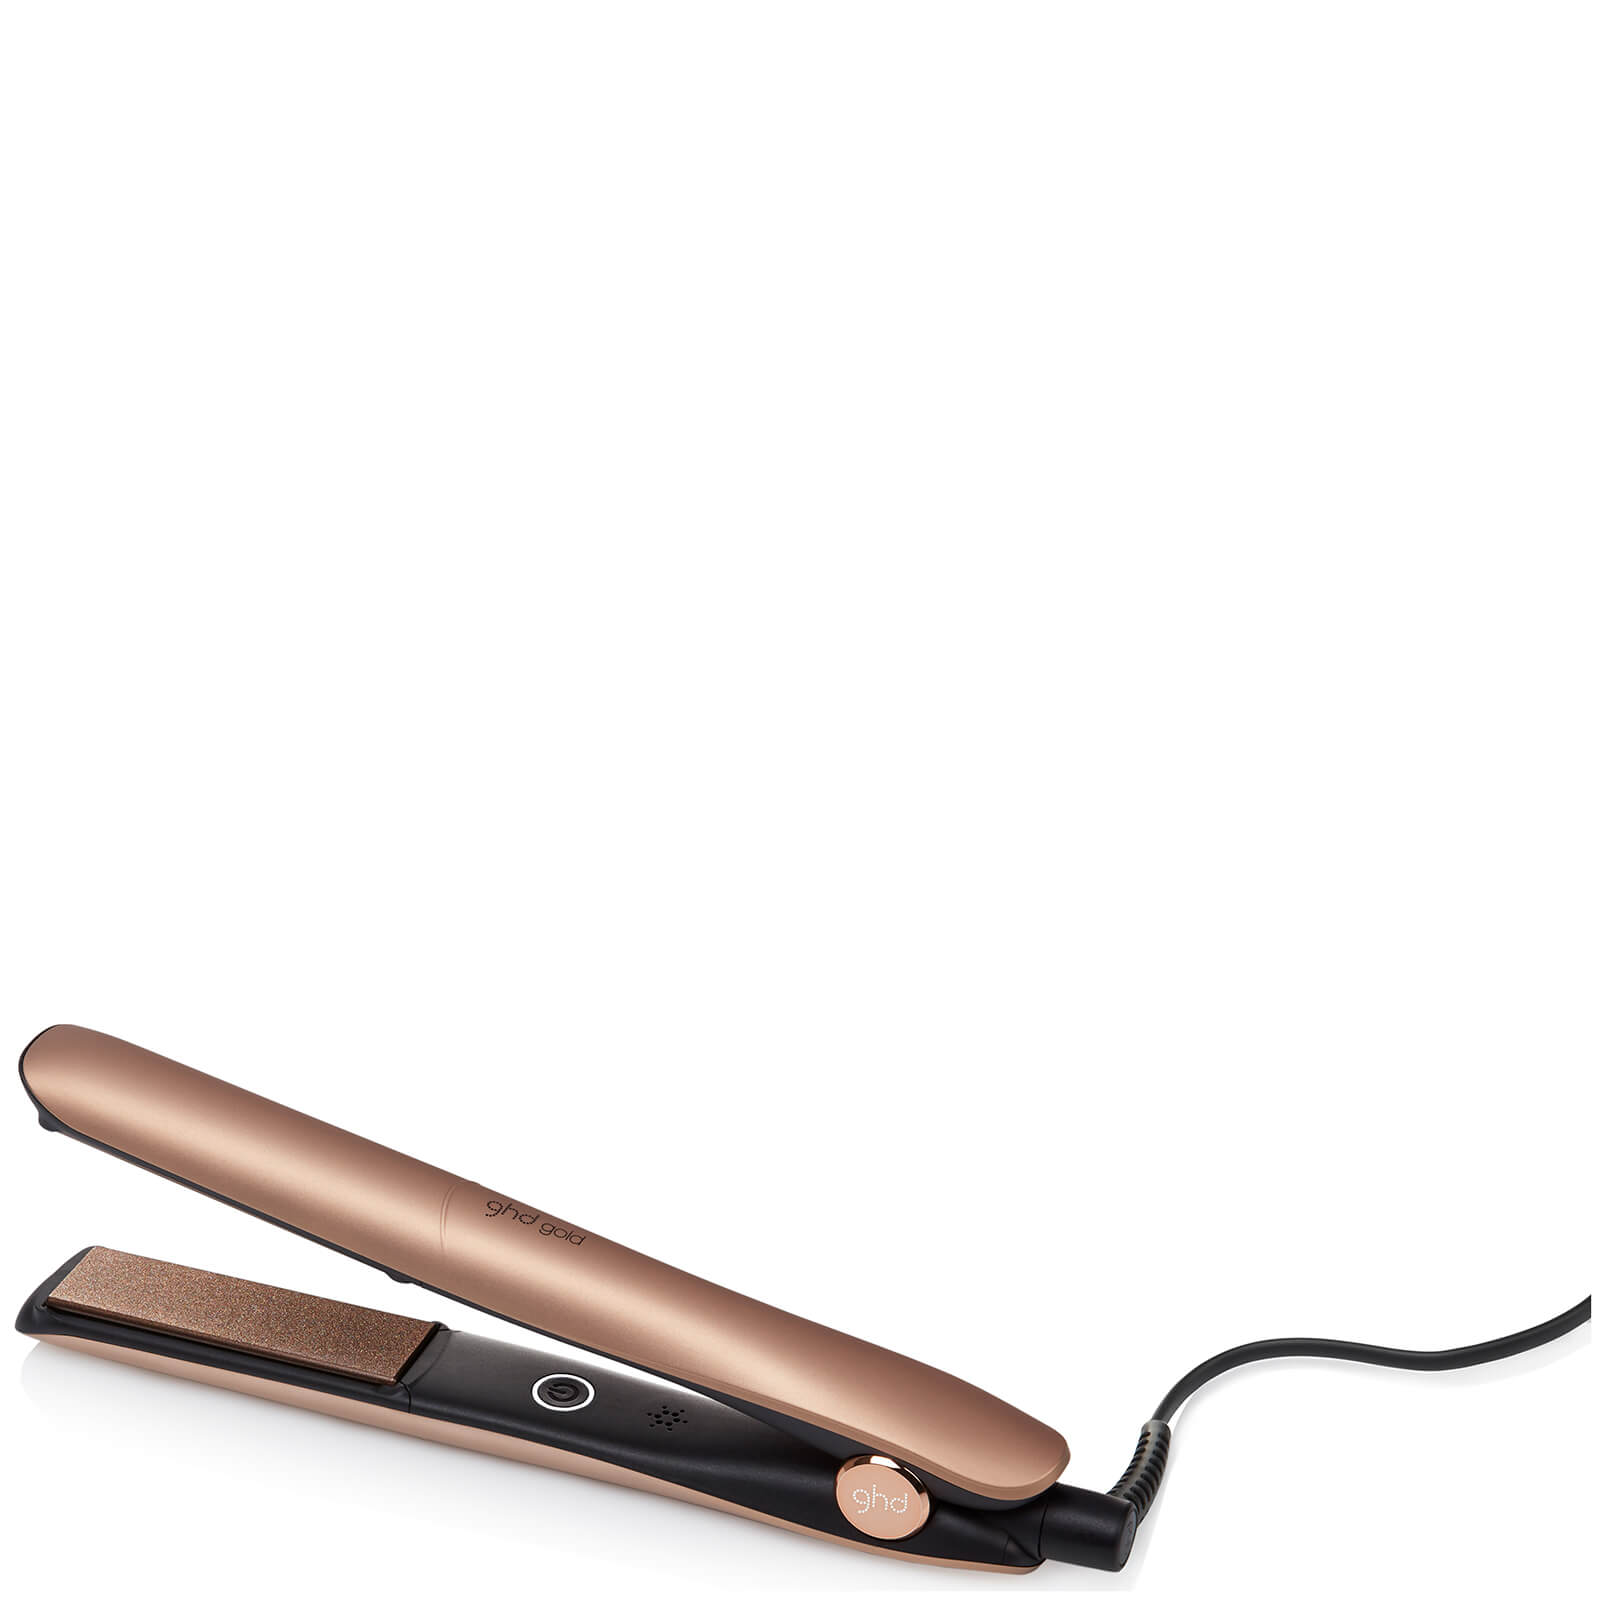 ghd Gold Earth Gold Styler